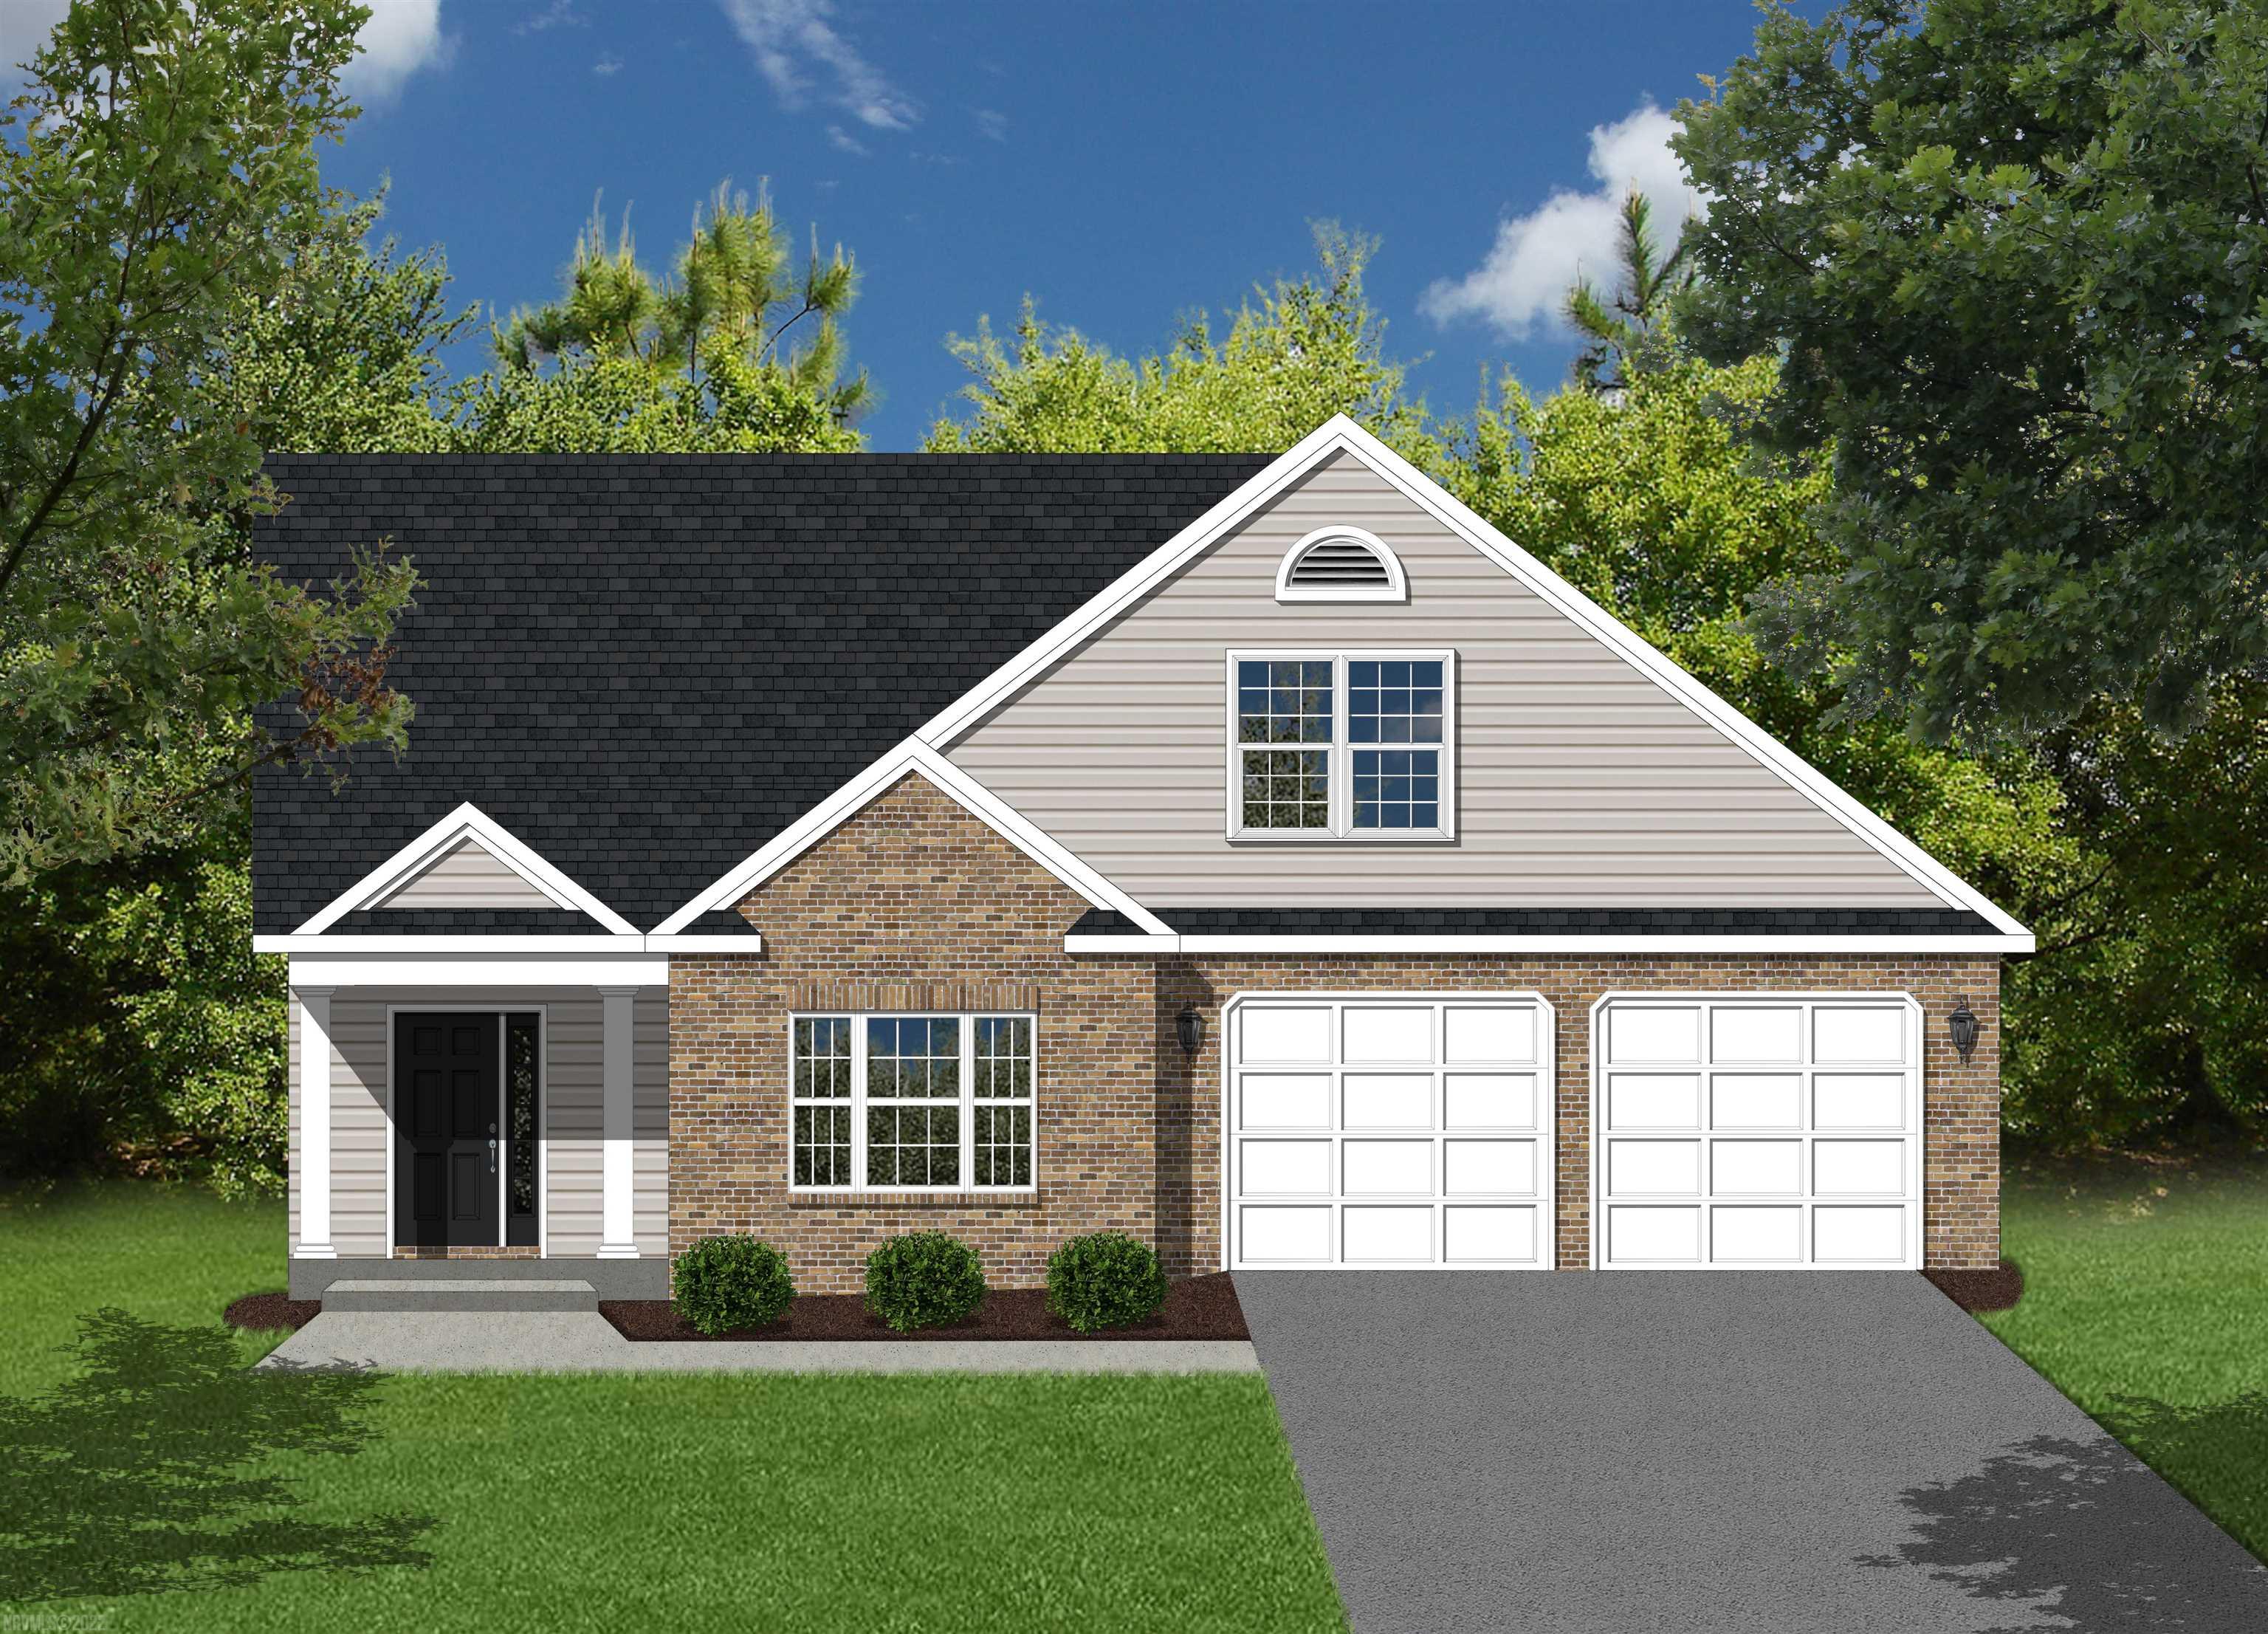 This is a pre-construction listing that is not yet built. Please find information below and pictures attached for our Georgetown style home which offers 2,343 square feet above grade, and 9’ framed walls on first floor with smooth drywall finish.  This house plan incorporates hardwoods on the entire main living level, ceramic tile in the baths and laundry, oak treads to the second floor, and carpet throughout remaining areas.  The master shower offers ceramic tiled walls and floor!  Premium Tahoe cabinets by Timberlake in the kitchen make the home even more beautiful.  The kitchen and bath counter tops are luxurious granite.  Upgraded trim in all finished areas.  Crown molding can be found in the dining room and master bedroom, as well as a chair rail with wainscoting in the dining room.  The exterior finishes consist of double-hung windows, brick, siding, and architectural shingles. Owner/Agent